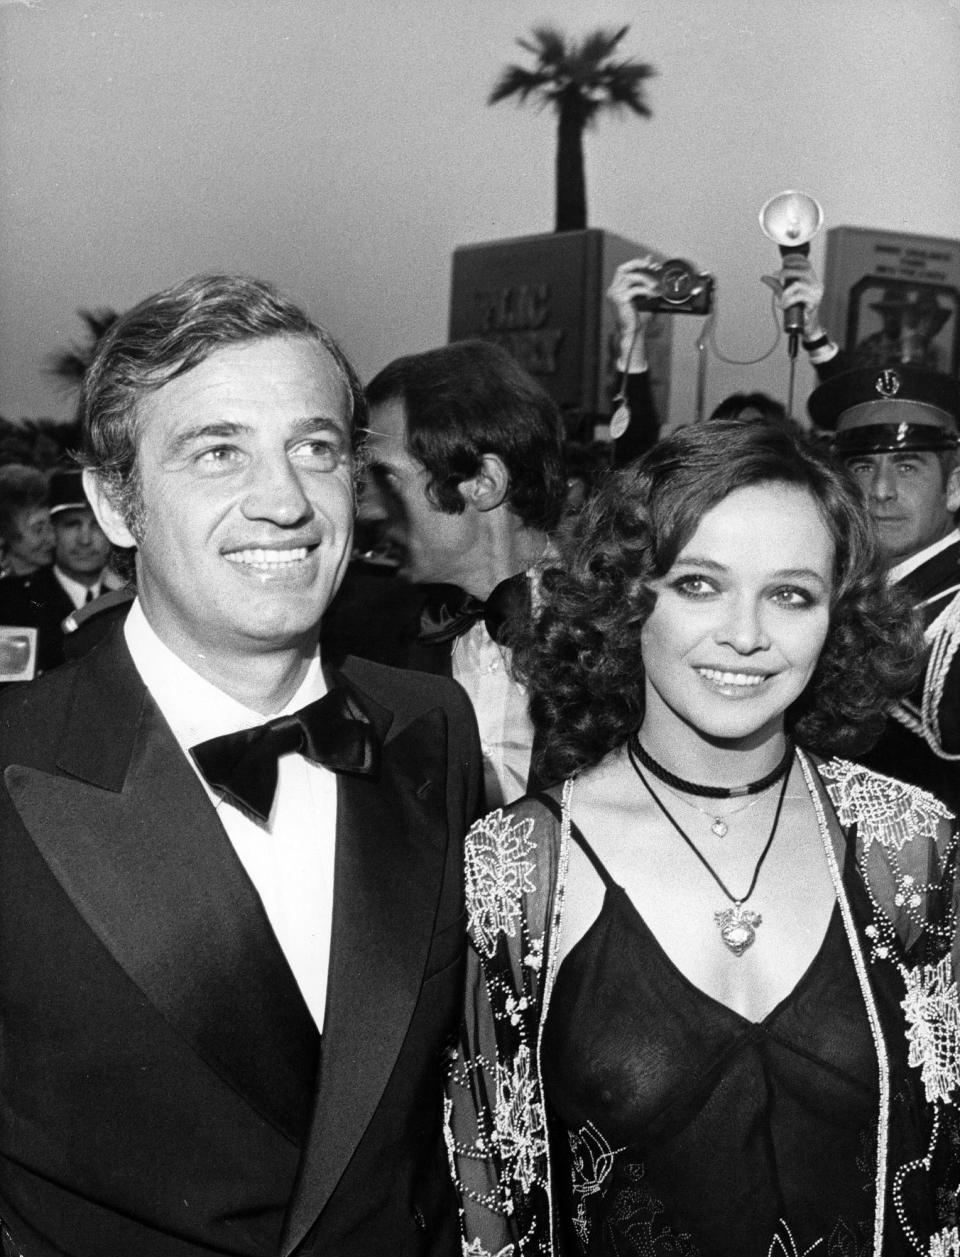 FILE - In this June 16, 1974 file photo, French actor Jean-Paul Belmondo and actress Laura Antonelli of Italy arrive at Festival House for presentation of film " Stavisky", on June 16, 1974. French New Wave actor Jean-Paul Belmondo has died, according to his lawyer’s office on Monday Sept. 6, 2021. (AP Photo/Levy, File)